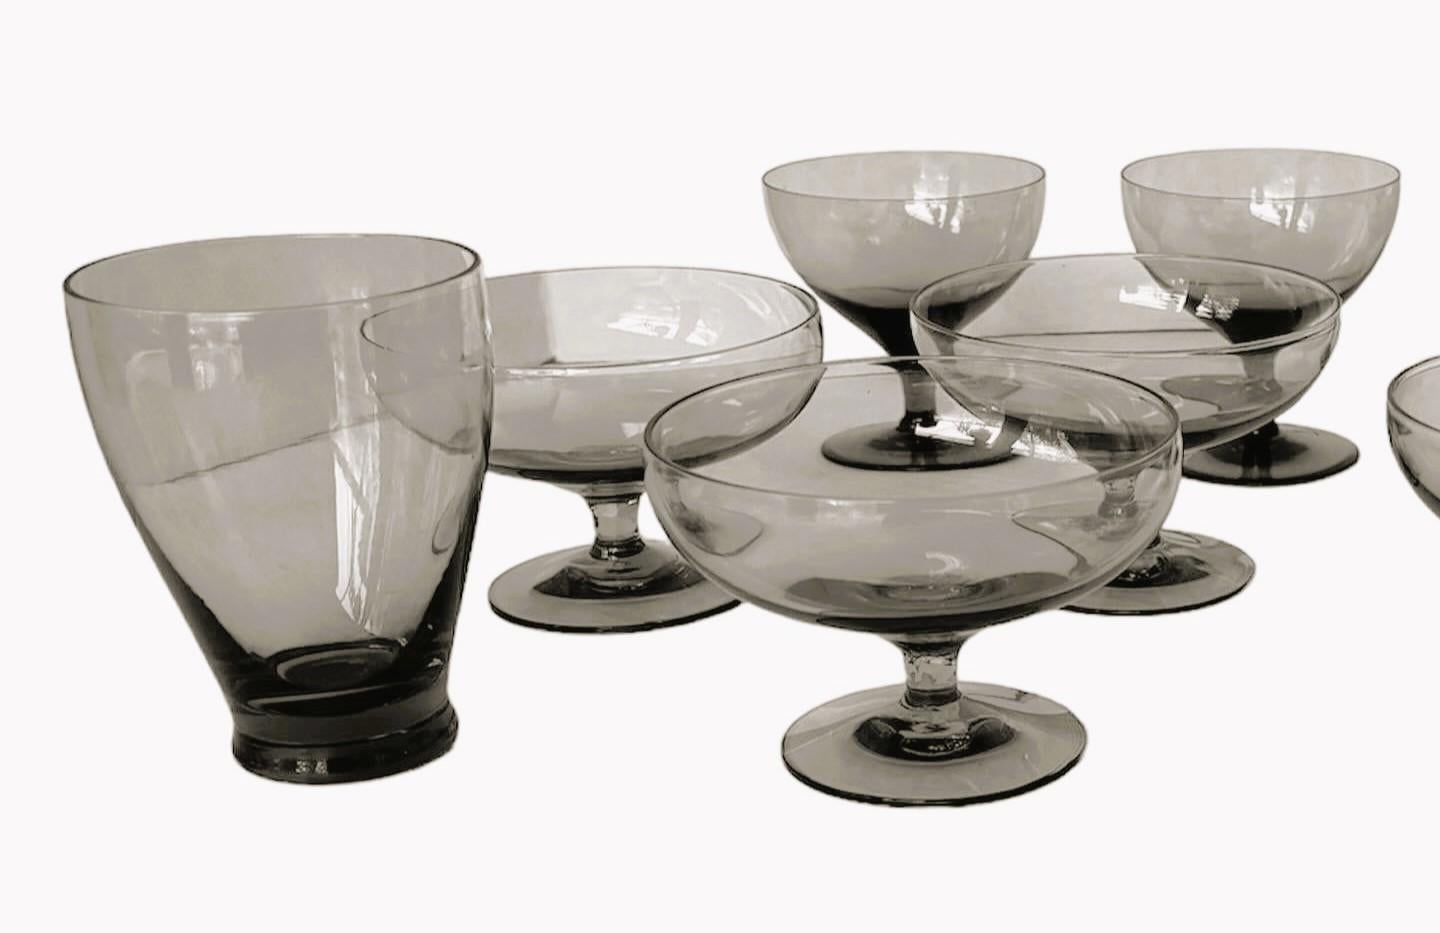 Mid Century Modern grouping of 12 American Modern glasses designed by Russel Wright and manufactured by Morgantown. Consisting of 12 Granite Gray – 2 juice glasses, 6 dessert/Champagne and 4 wine goblet all in Very Good condition. Since they are